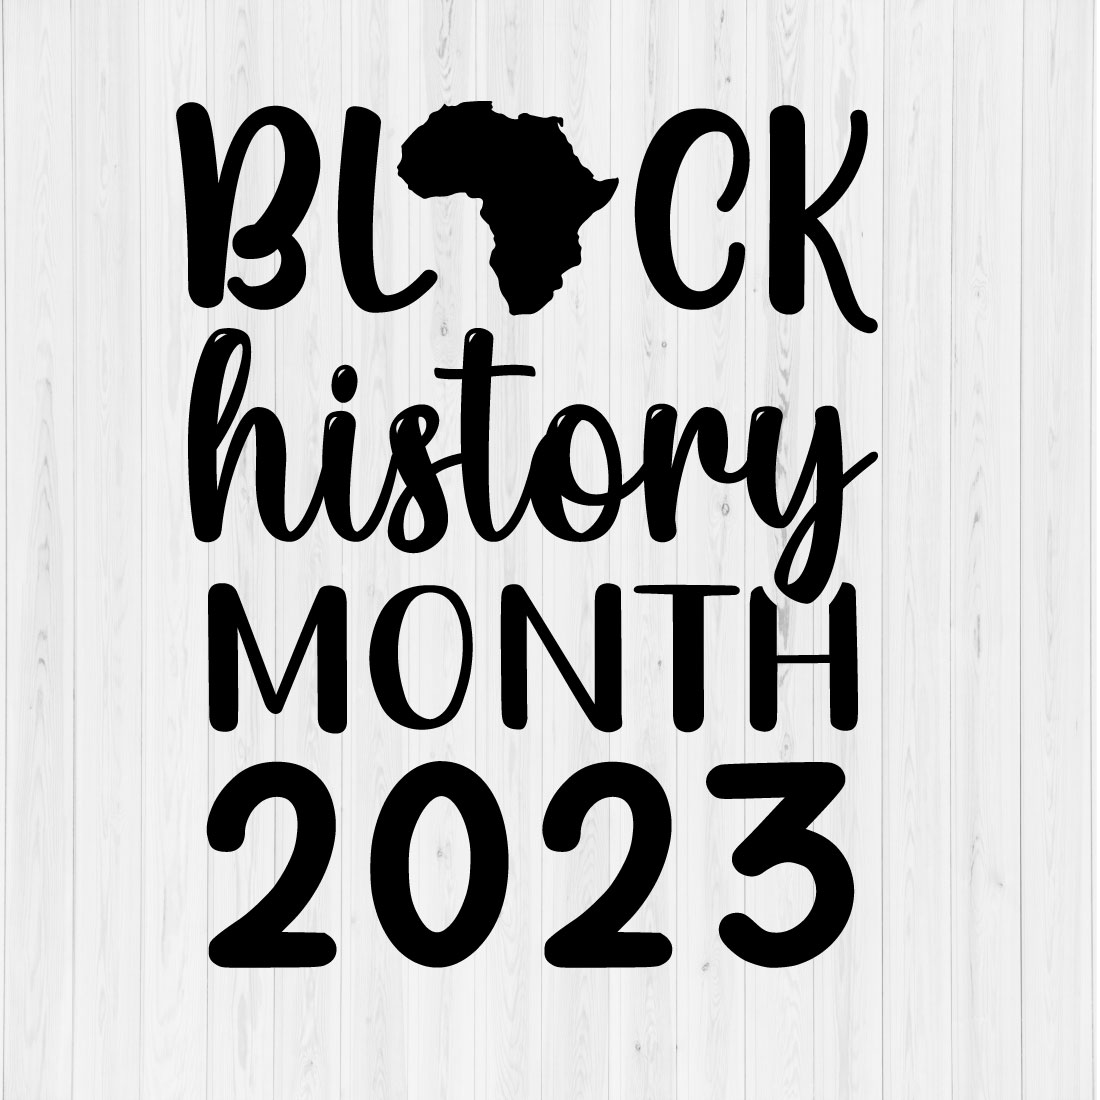 Black History Month 2023 preview image.